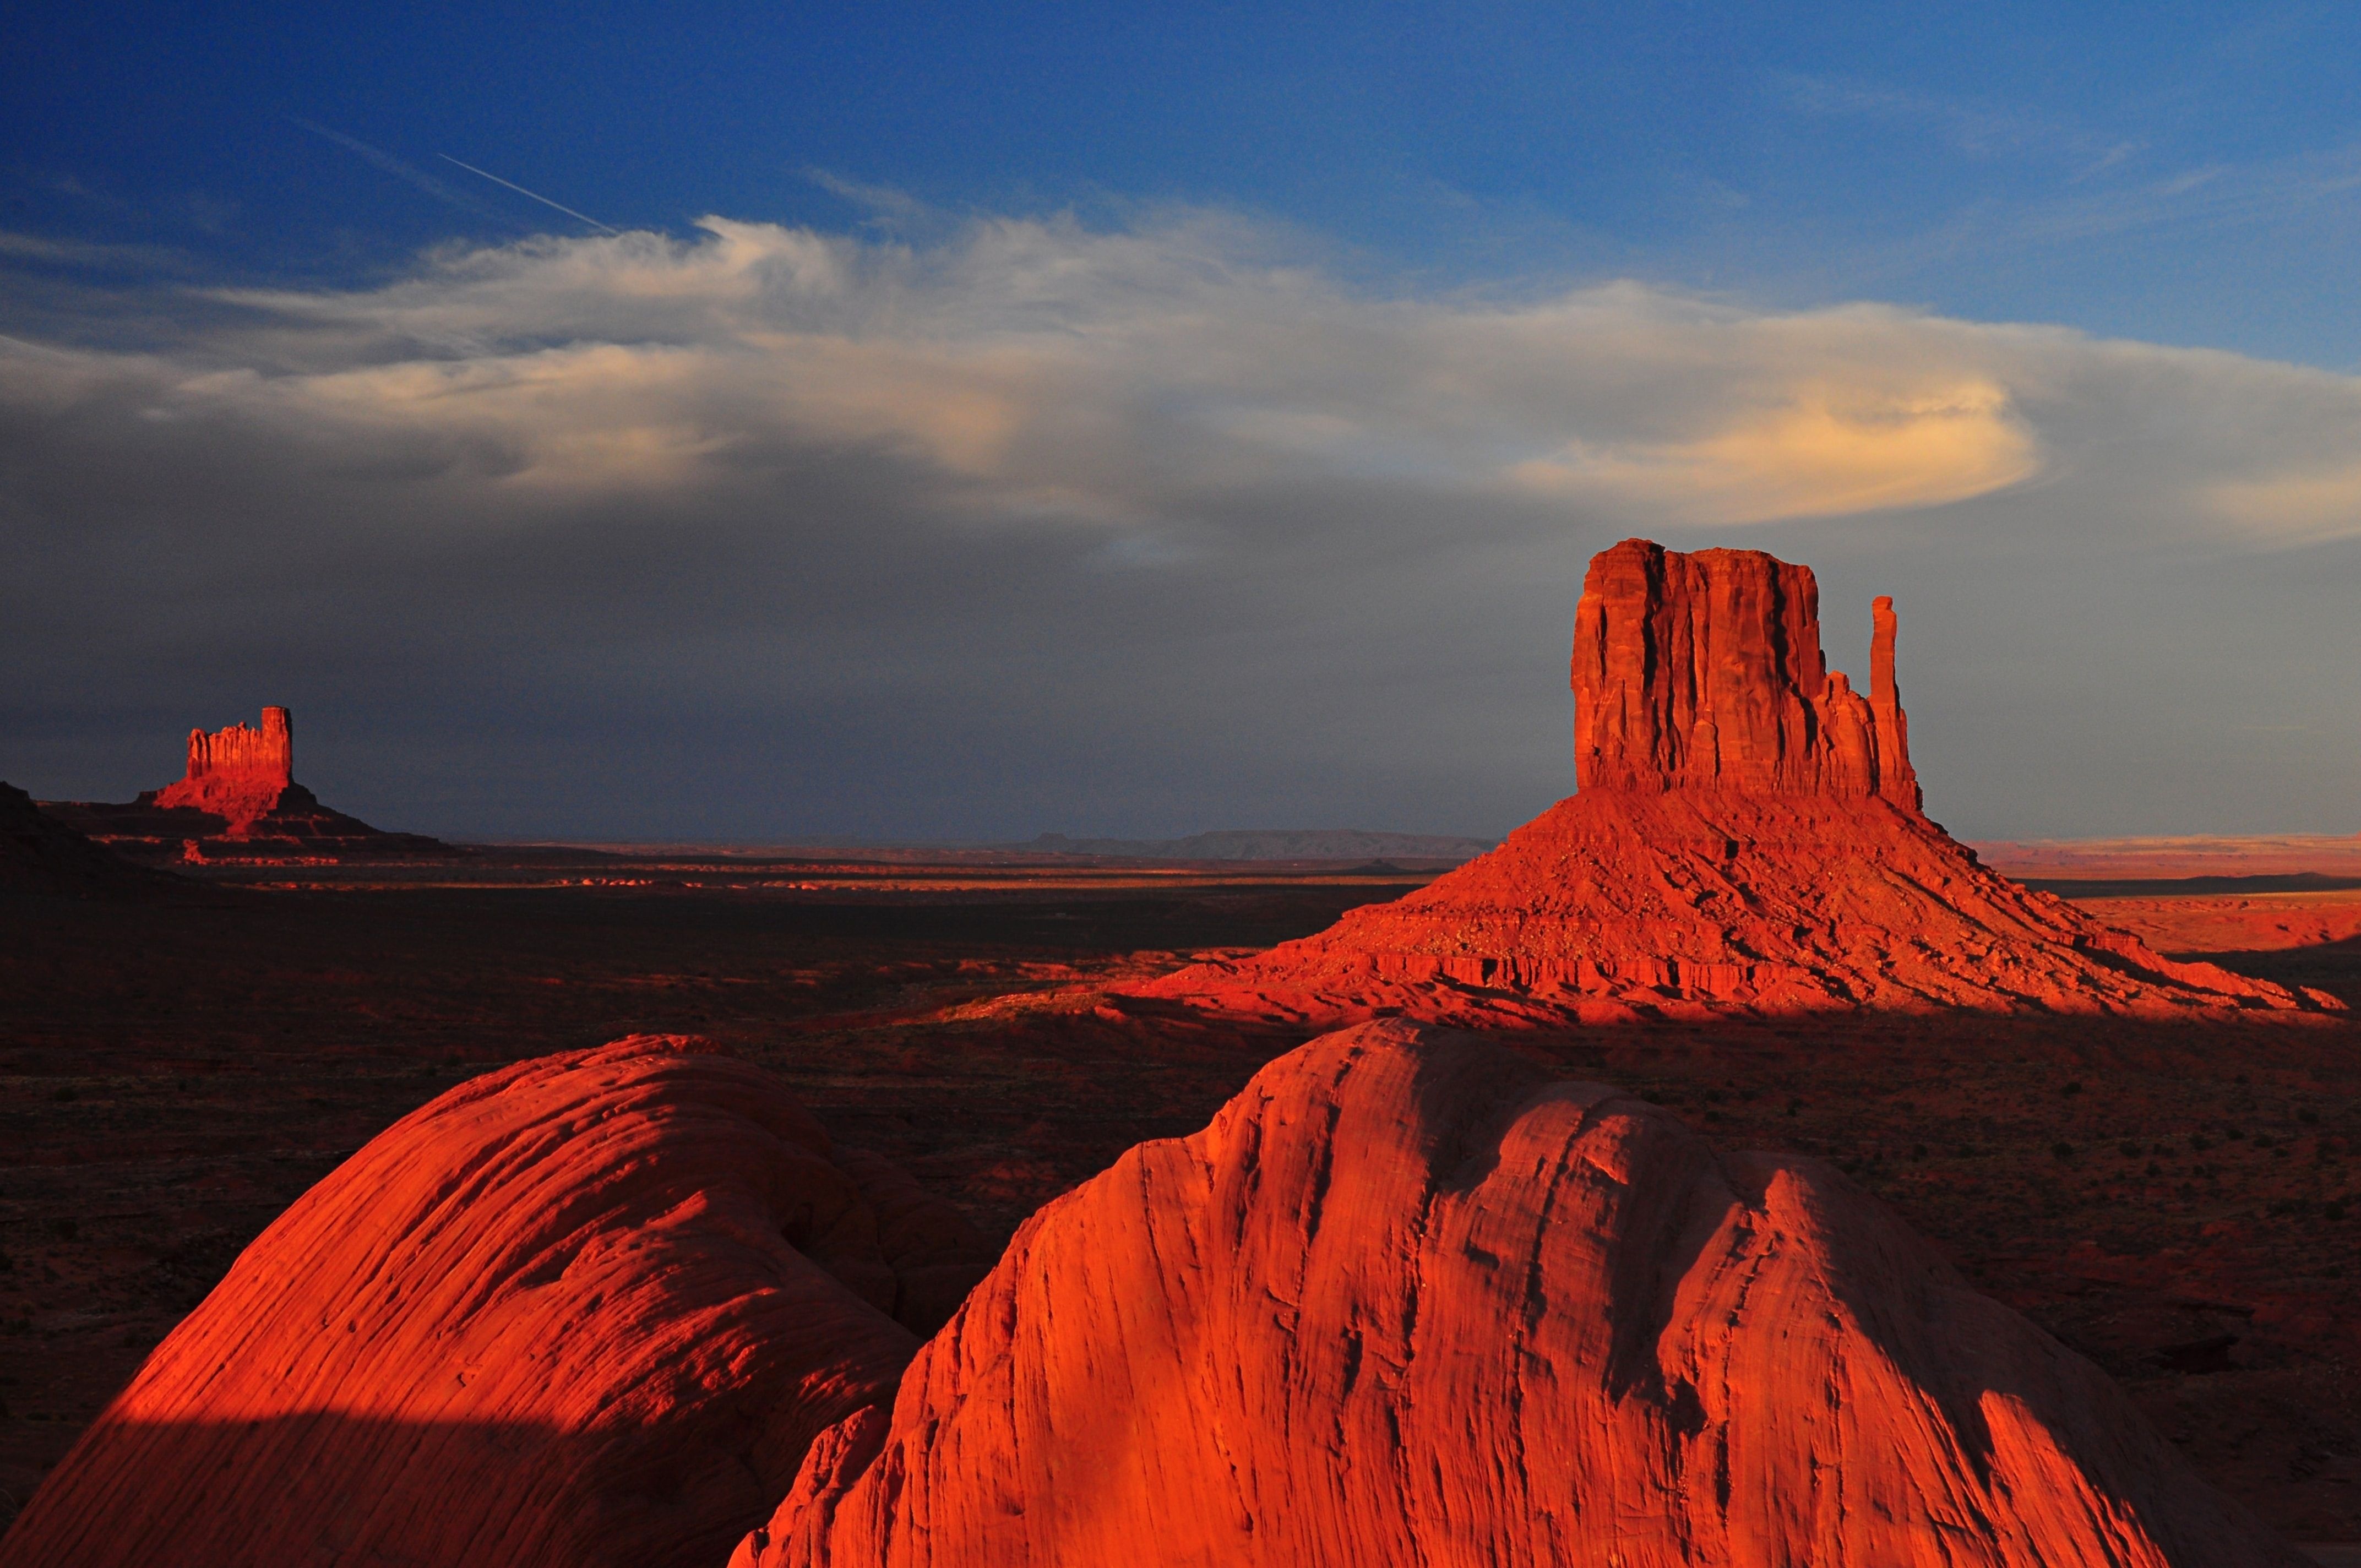 Monument Valley Navajo Tribal Park (Photo credit to NOAA) 4288 x